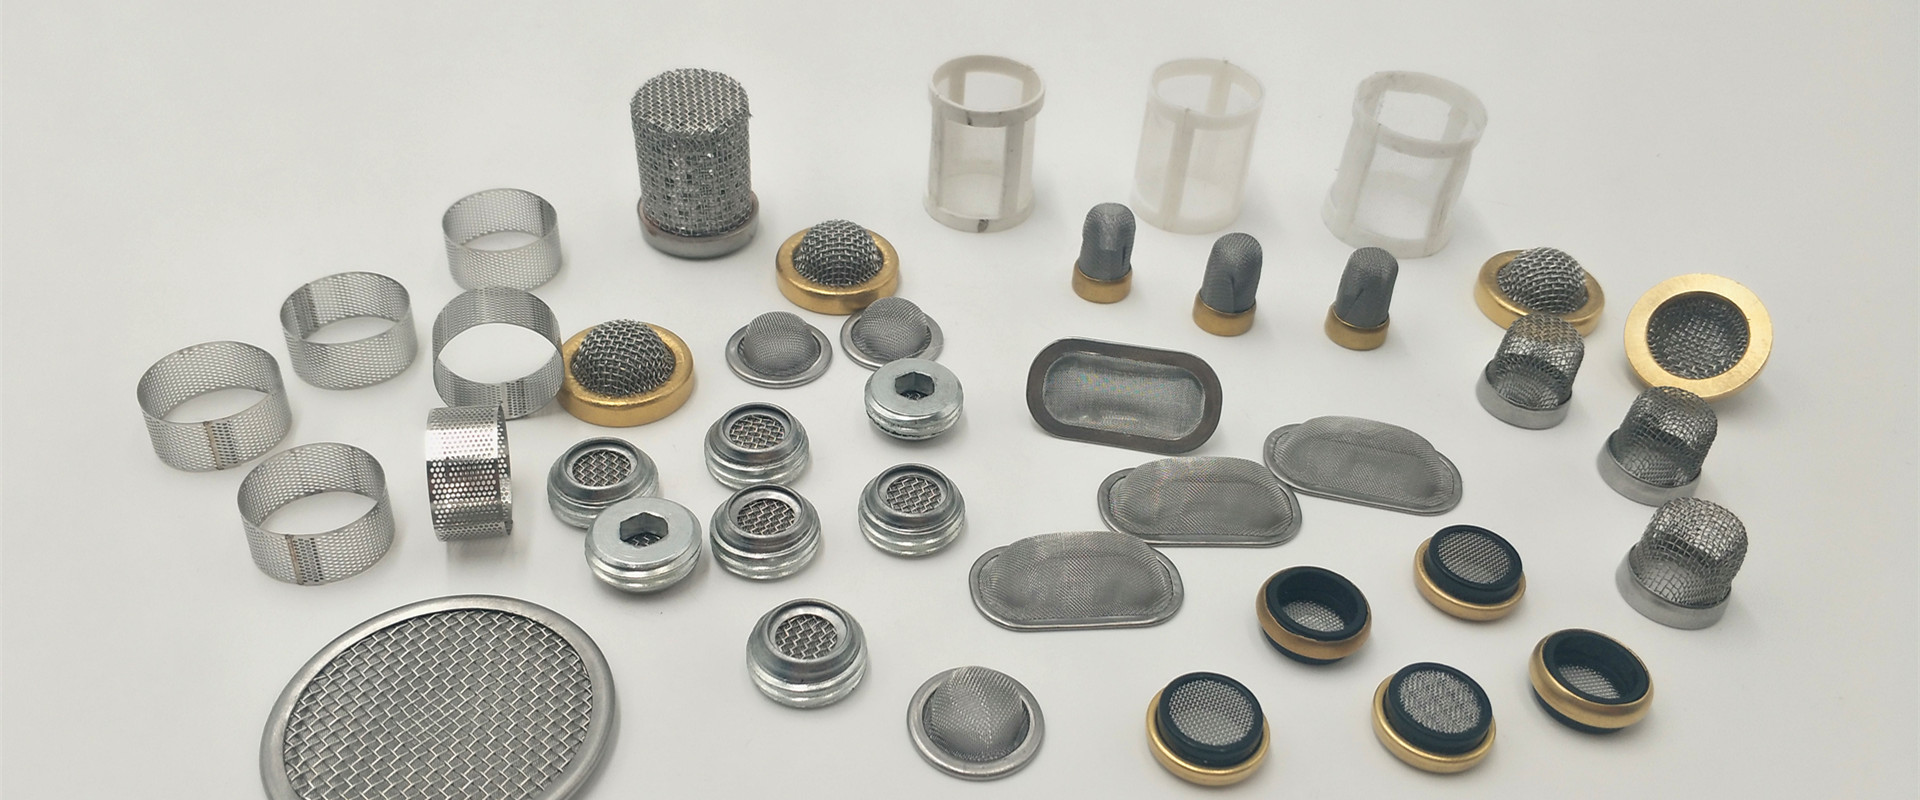 Featured products:High pressure filter discs,hydraulic filter elements,fuel injector filters,diesel oil filter elements,hydraulic lubrication filters.